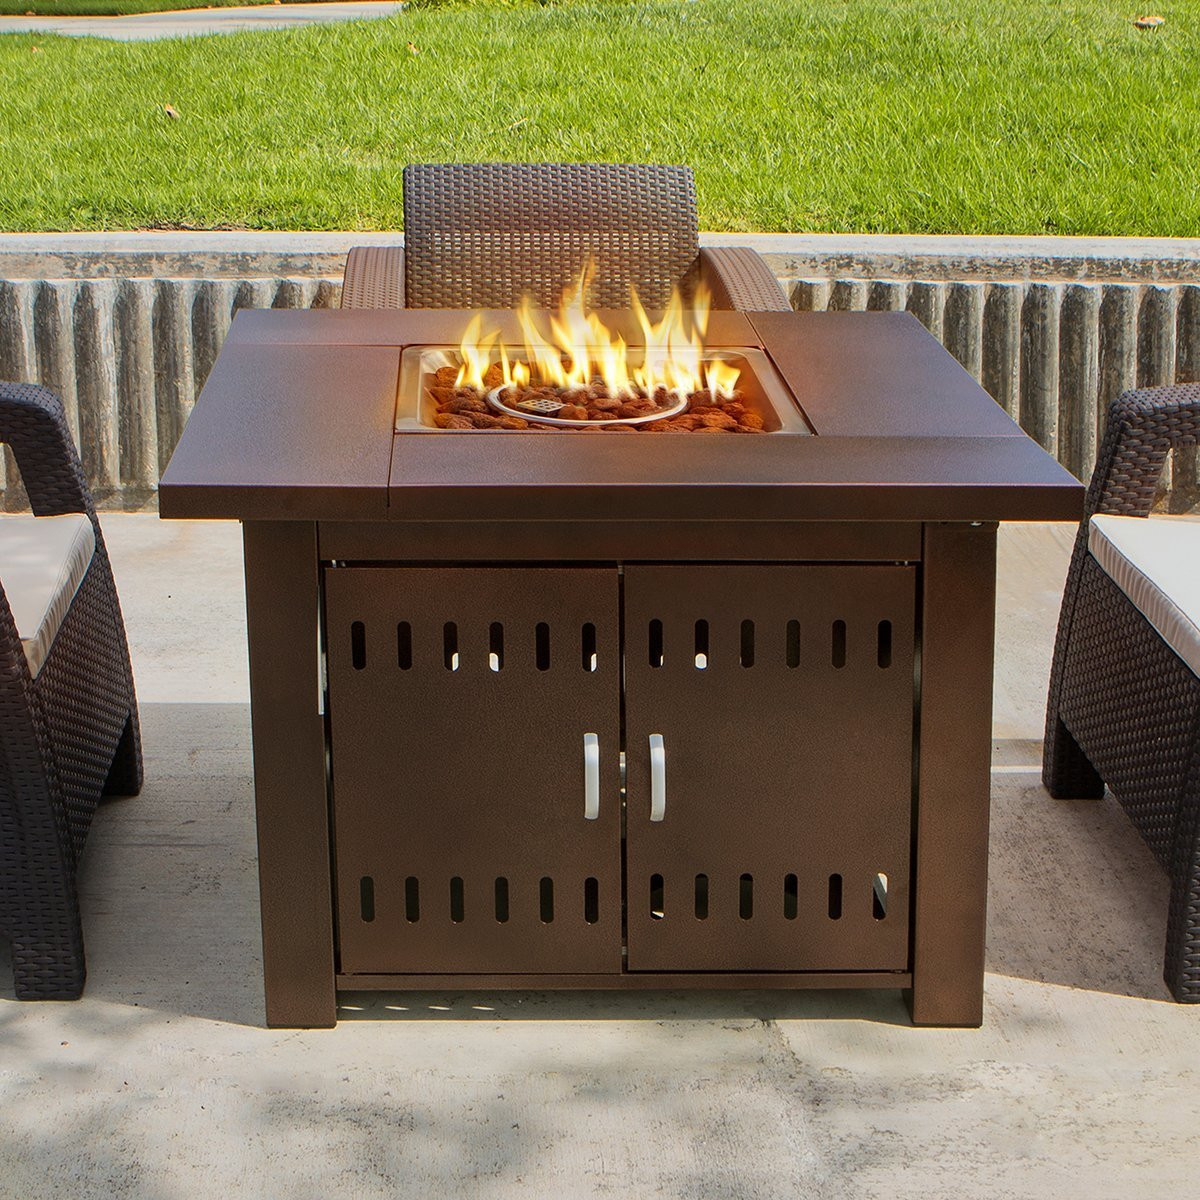 Patio Fire Pit Propane
 NEW Outdoor Fire Pit Square Table Firepit Propane Gas Fire